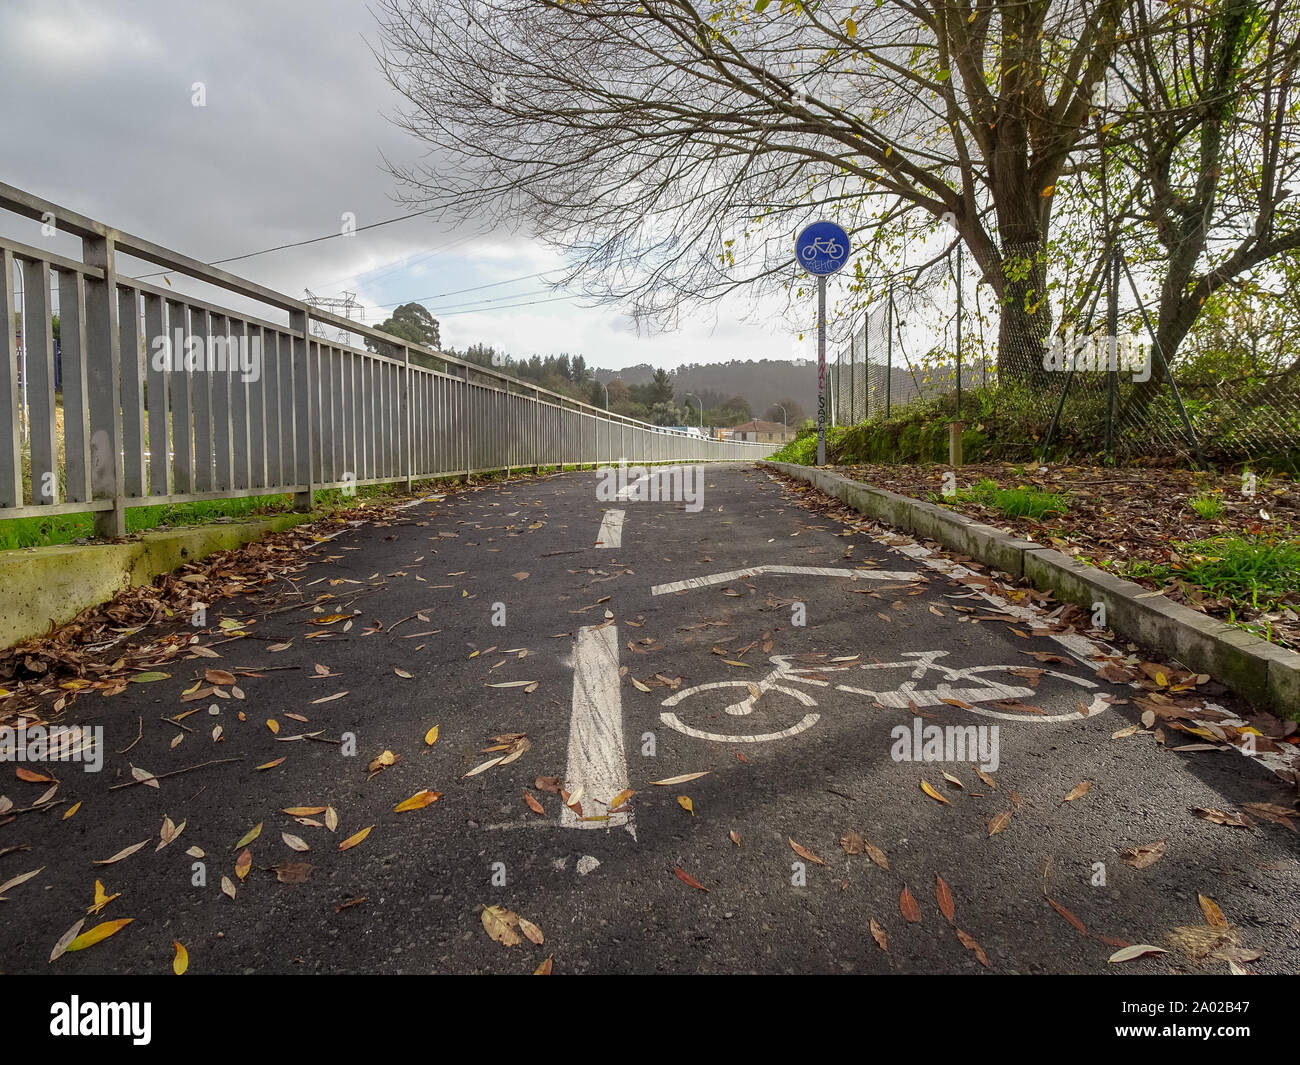 Cambre / Spain - December 09 2018: Cycle path in Cambre Spain Stock Photo